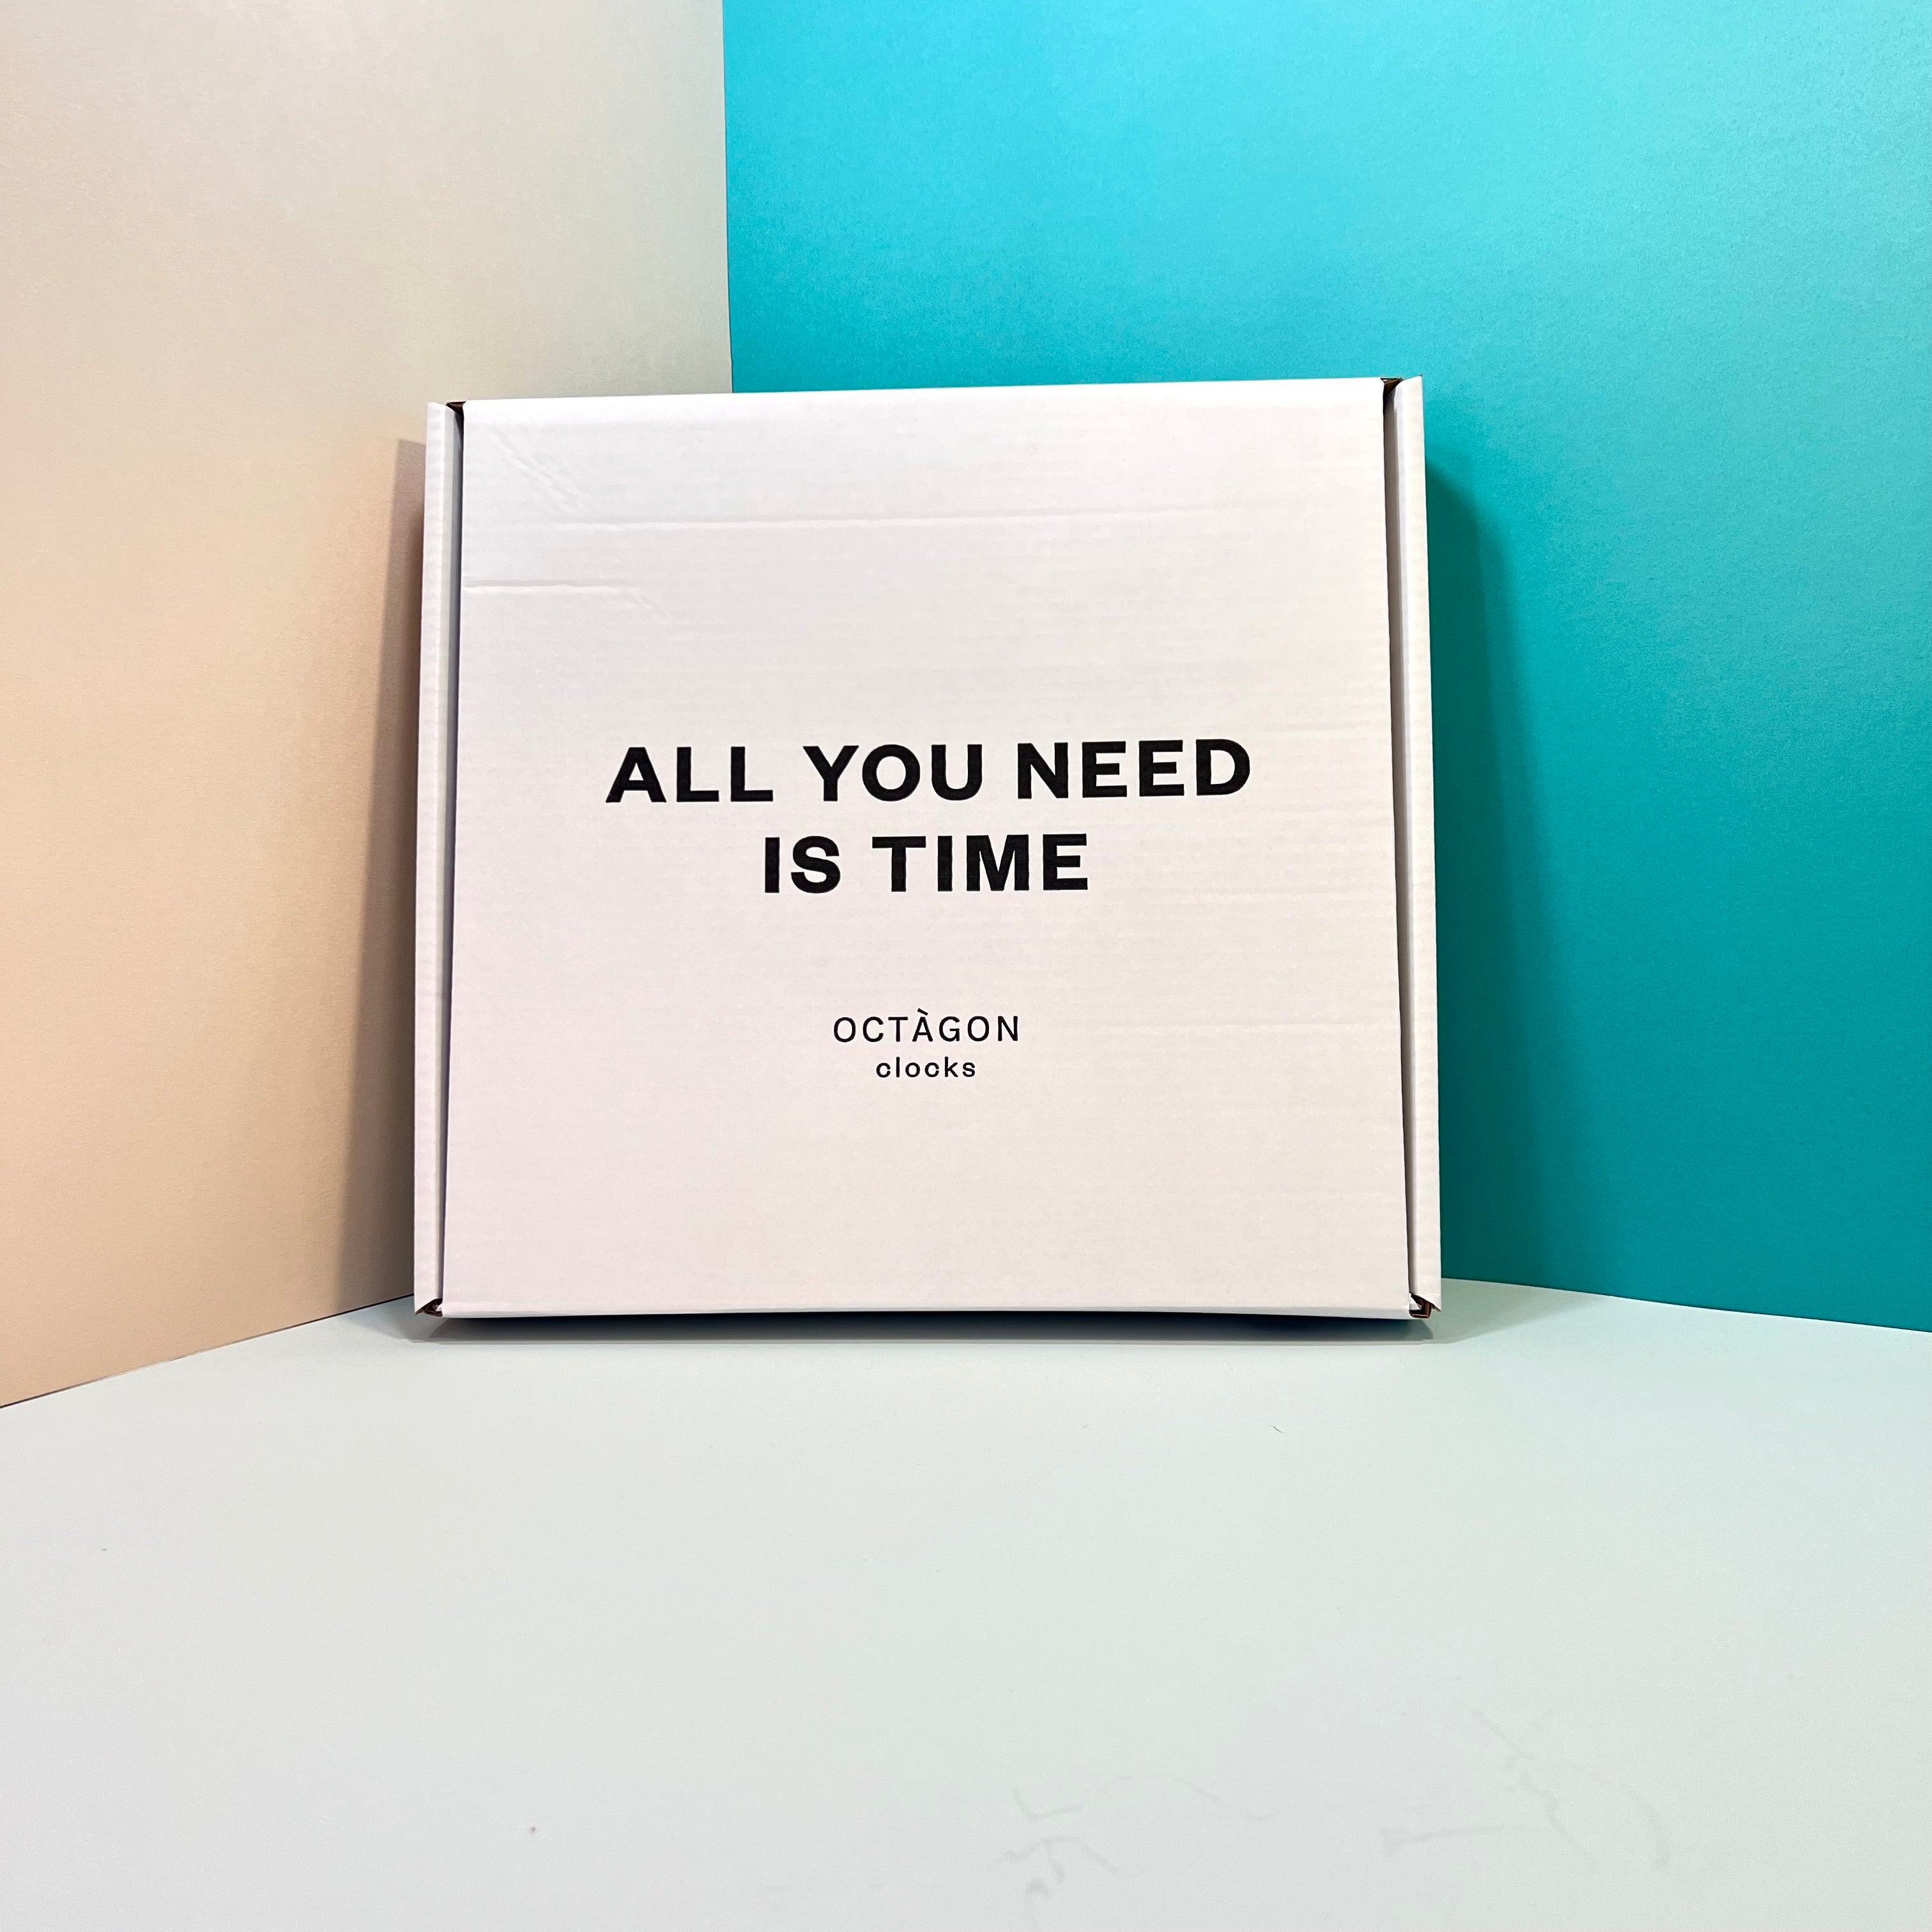 Box with &quot;All you need is time&quot; print leaning on a colored wall | Caja estampada &quot;All ypu need is time&quot; apoyada en una pared de colores. | Caixa estampada &quot;All you need is time&quot; recolzada en una paret de colors.